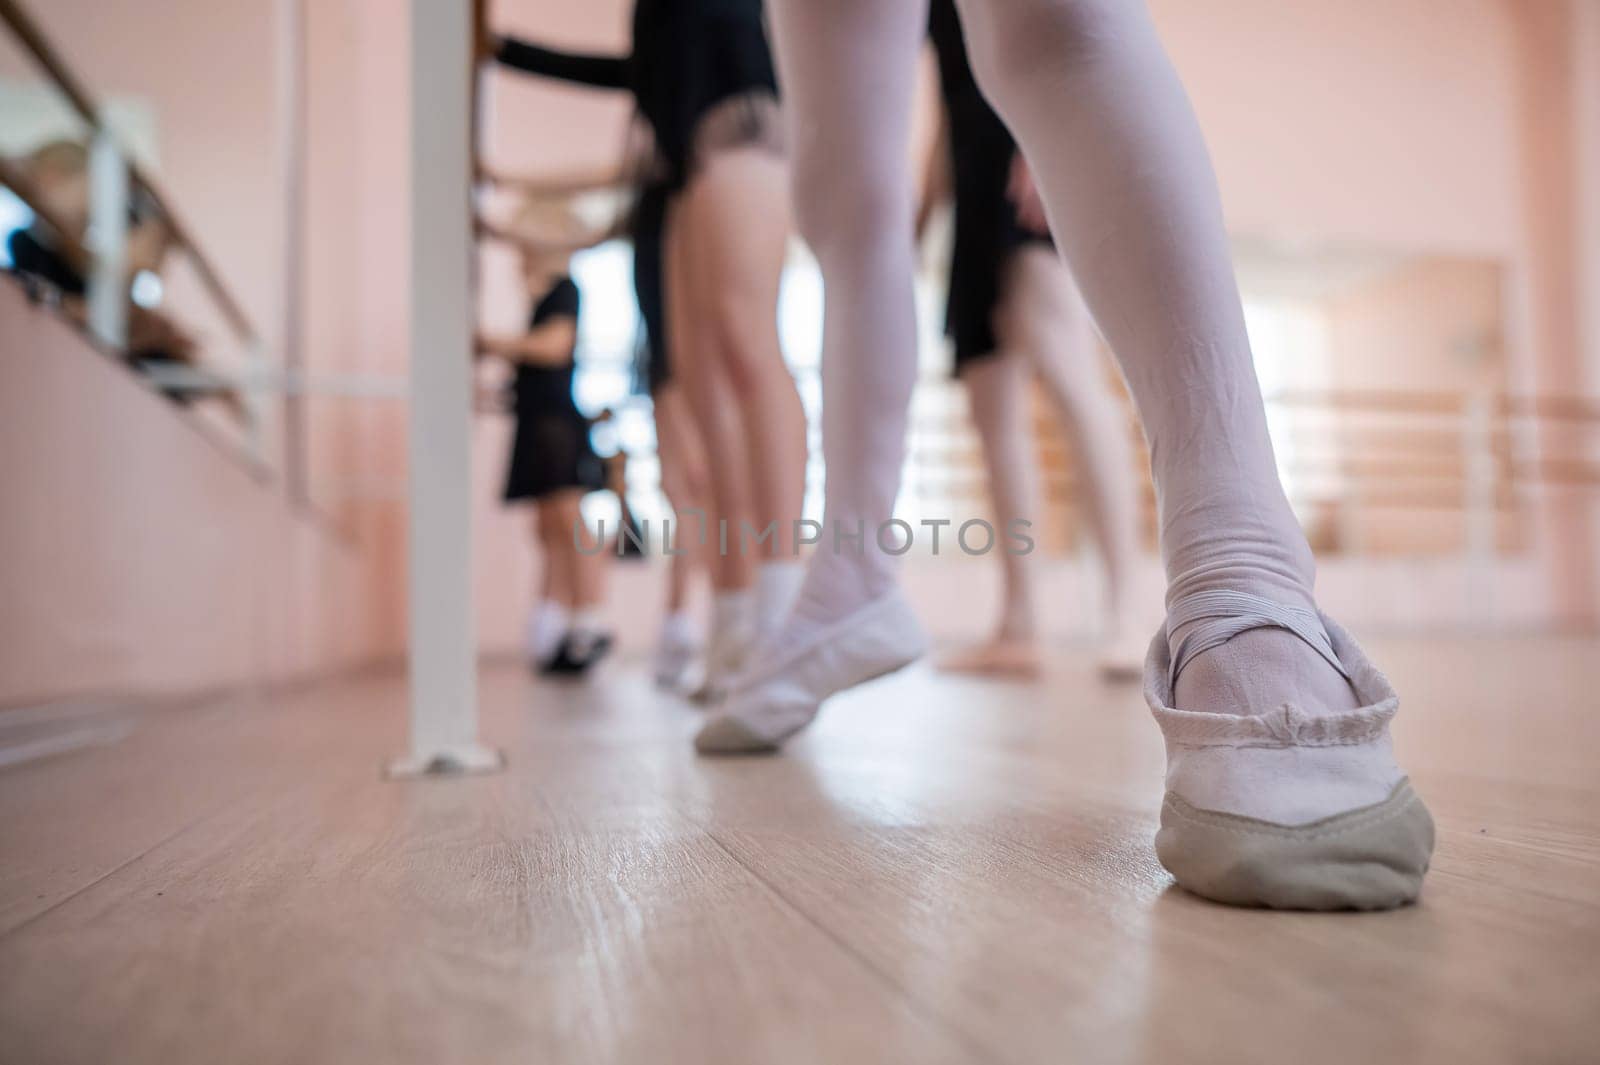 Little girls practice ballet at the barre. Close-up of young ballerinas' feet